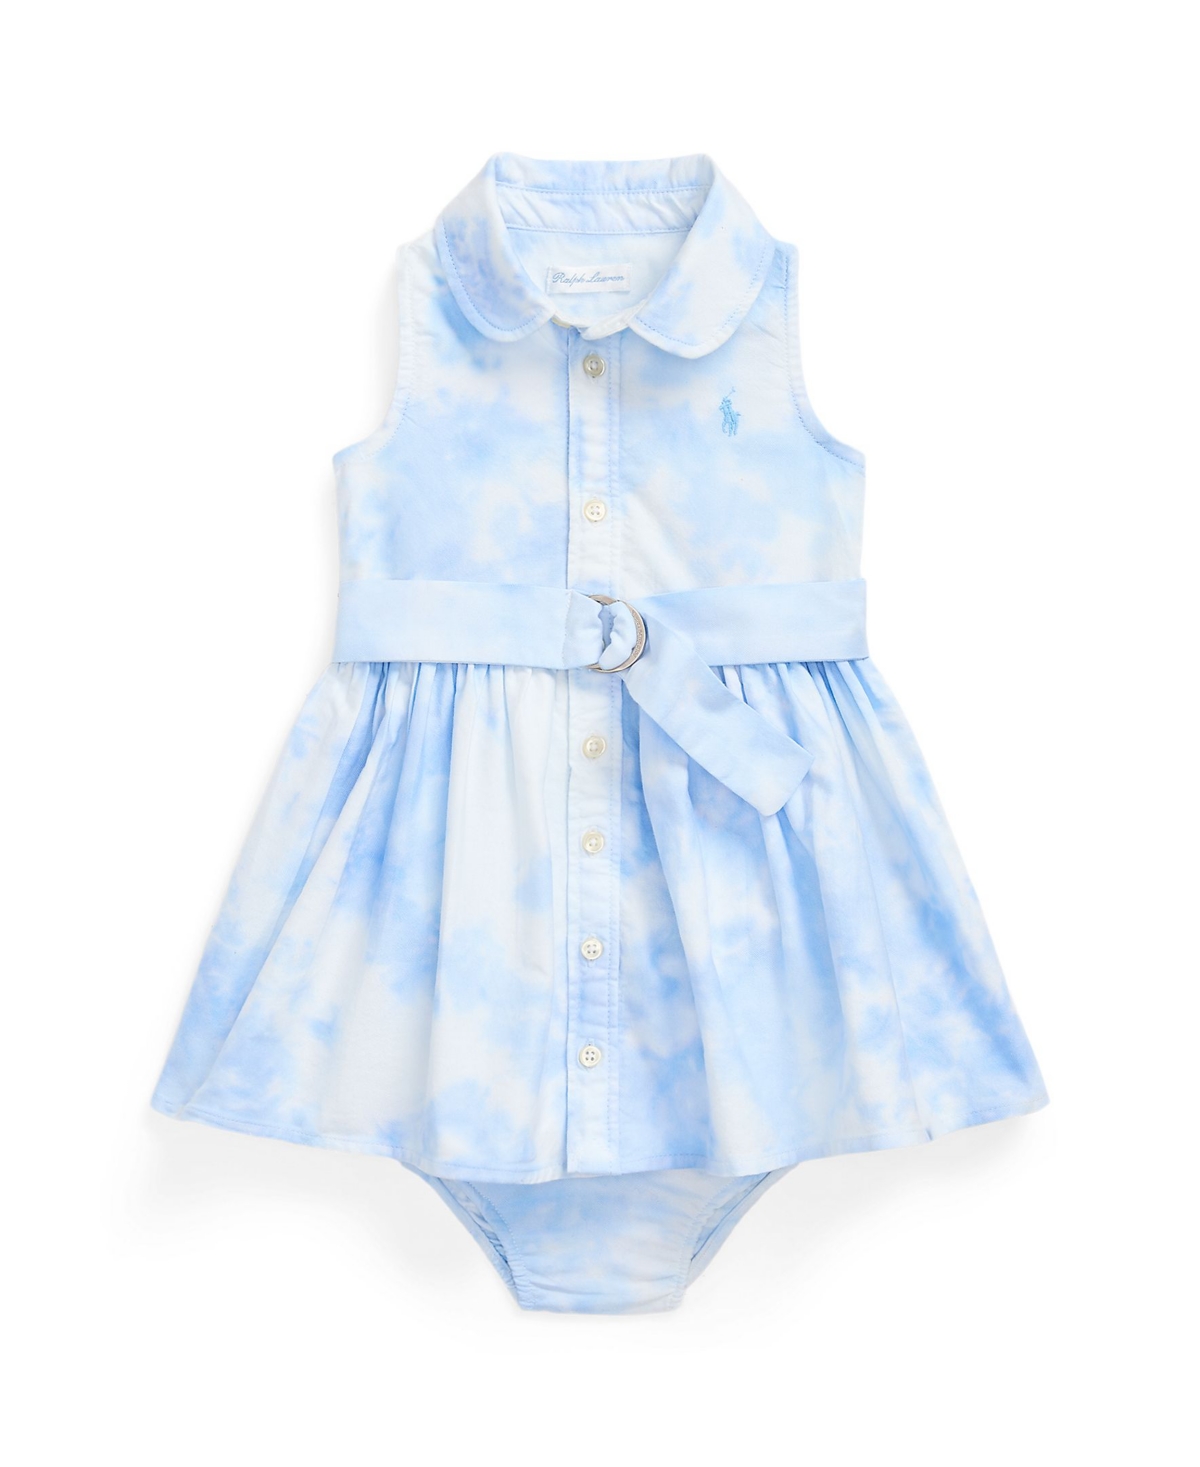 Polo Ralph Lauren Baby Girls Belted Graphic Shirtdress And Bloomer Set In Blue Tie Dye